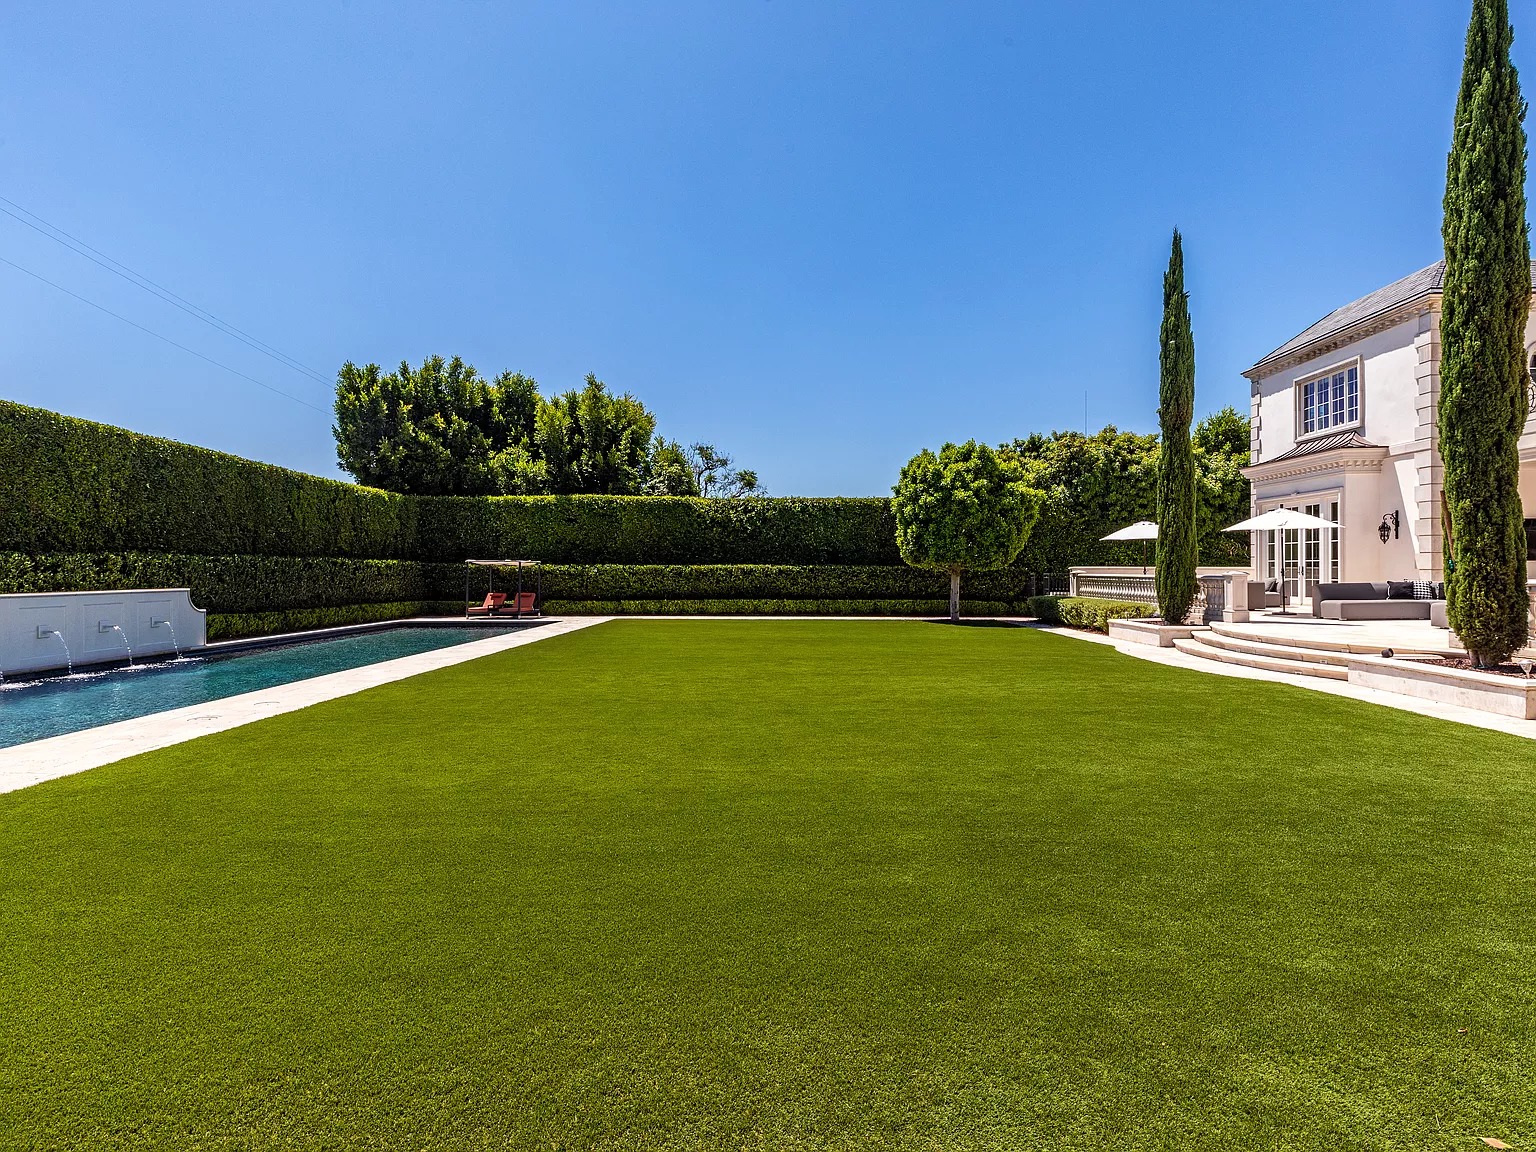 720 N Alta Dr, Beverly Hills, CA 90210 - $25,950,000 home for sale, house images, photos and pics gallery